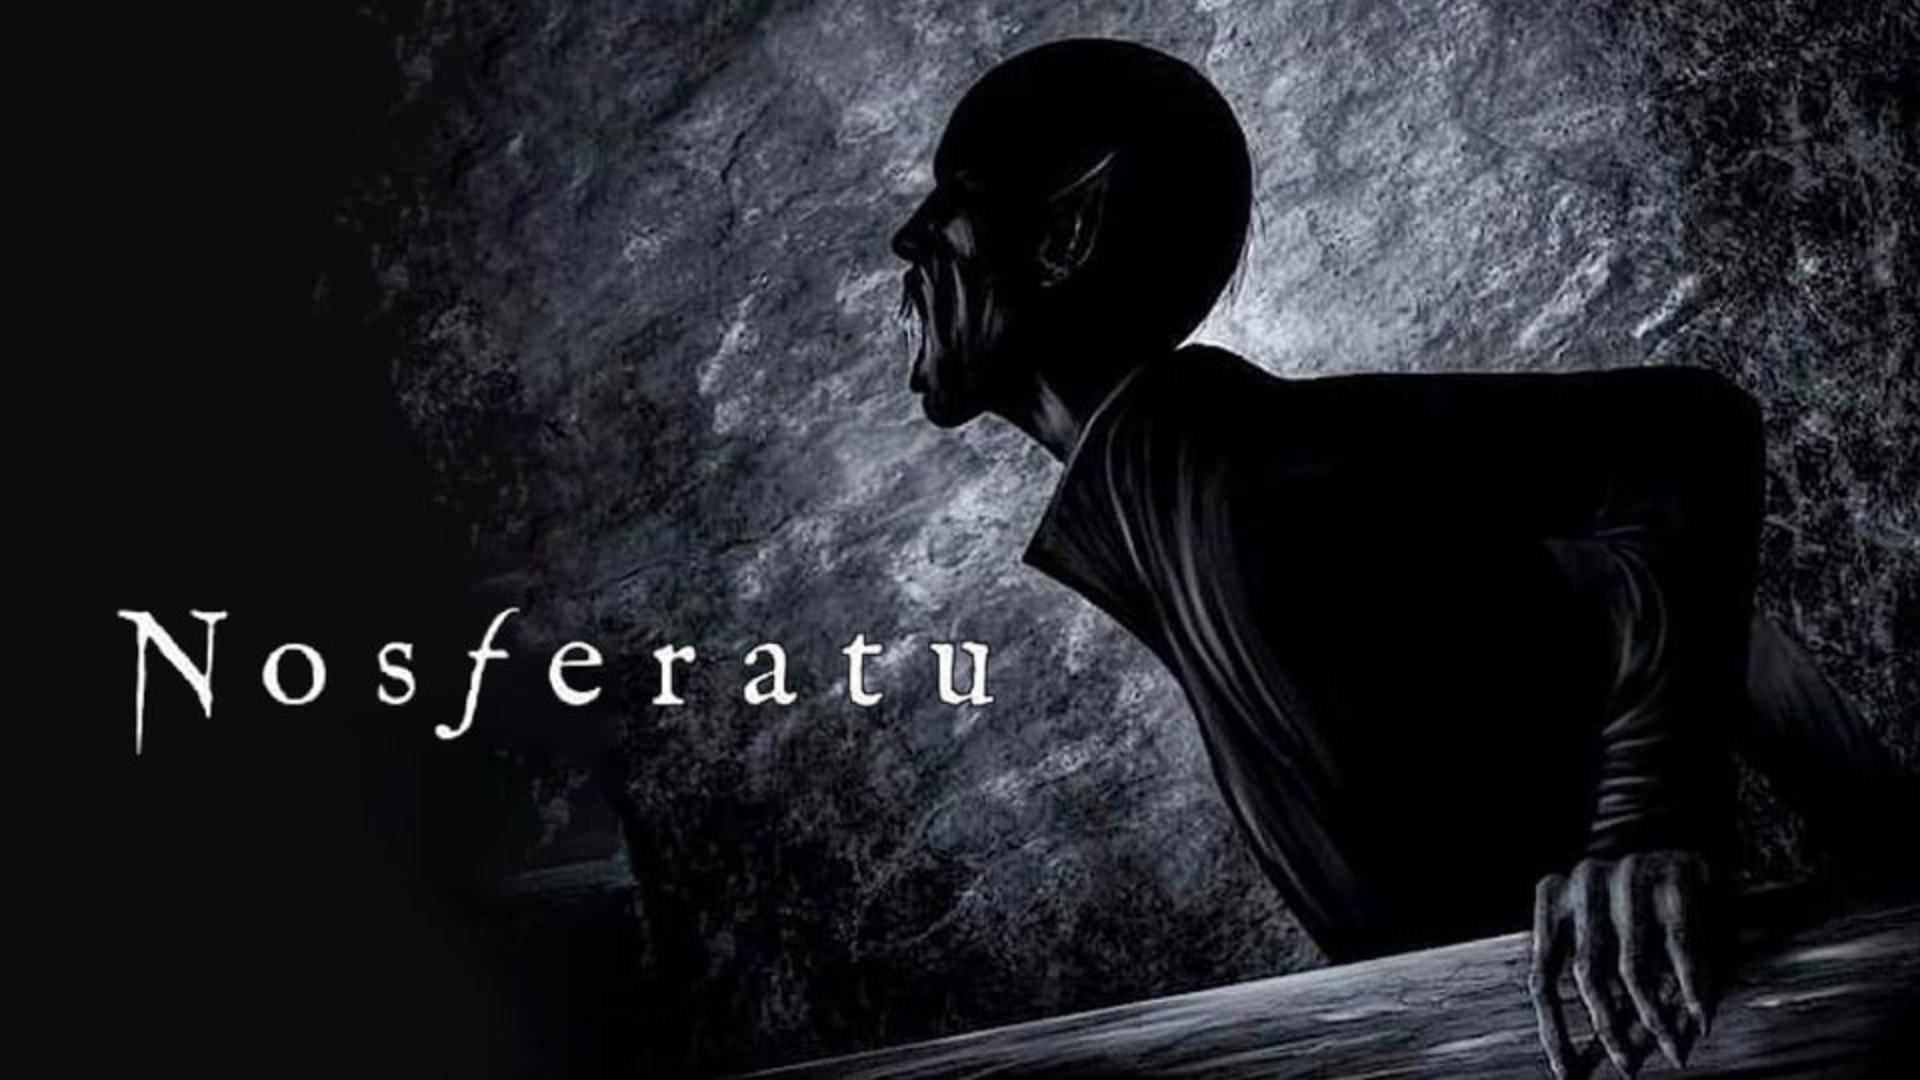 Everything we know about the new 'Nosferatu' film